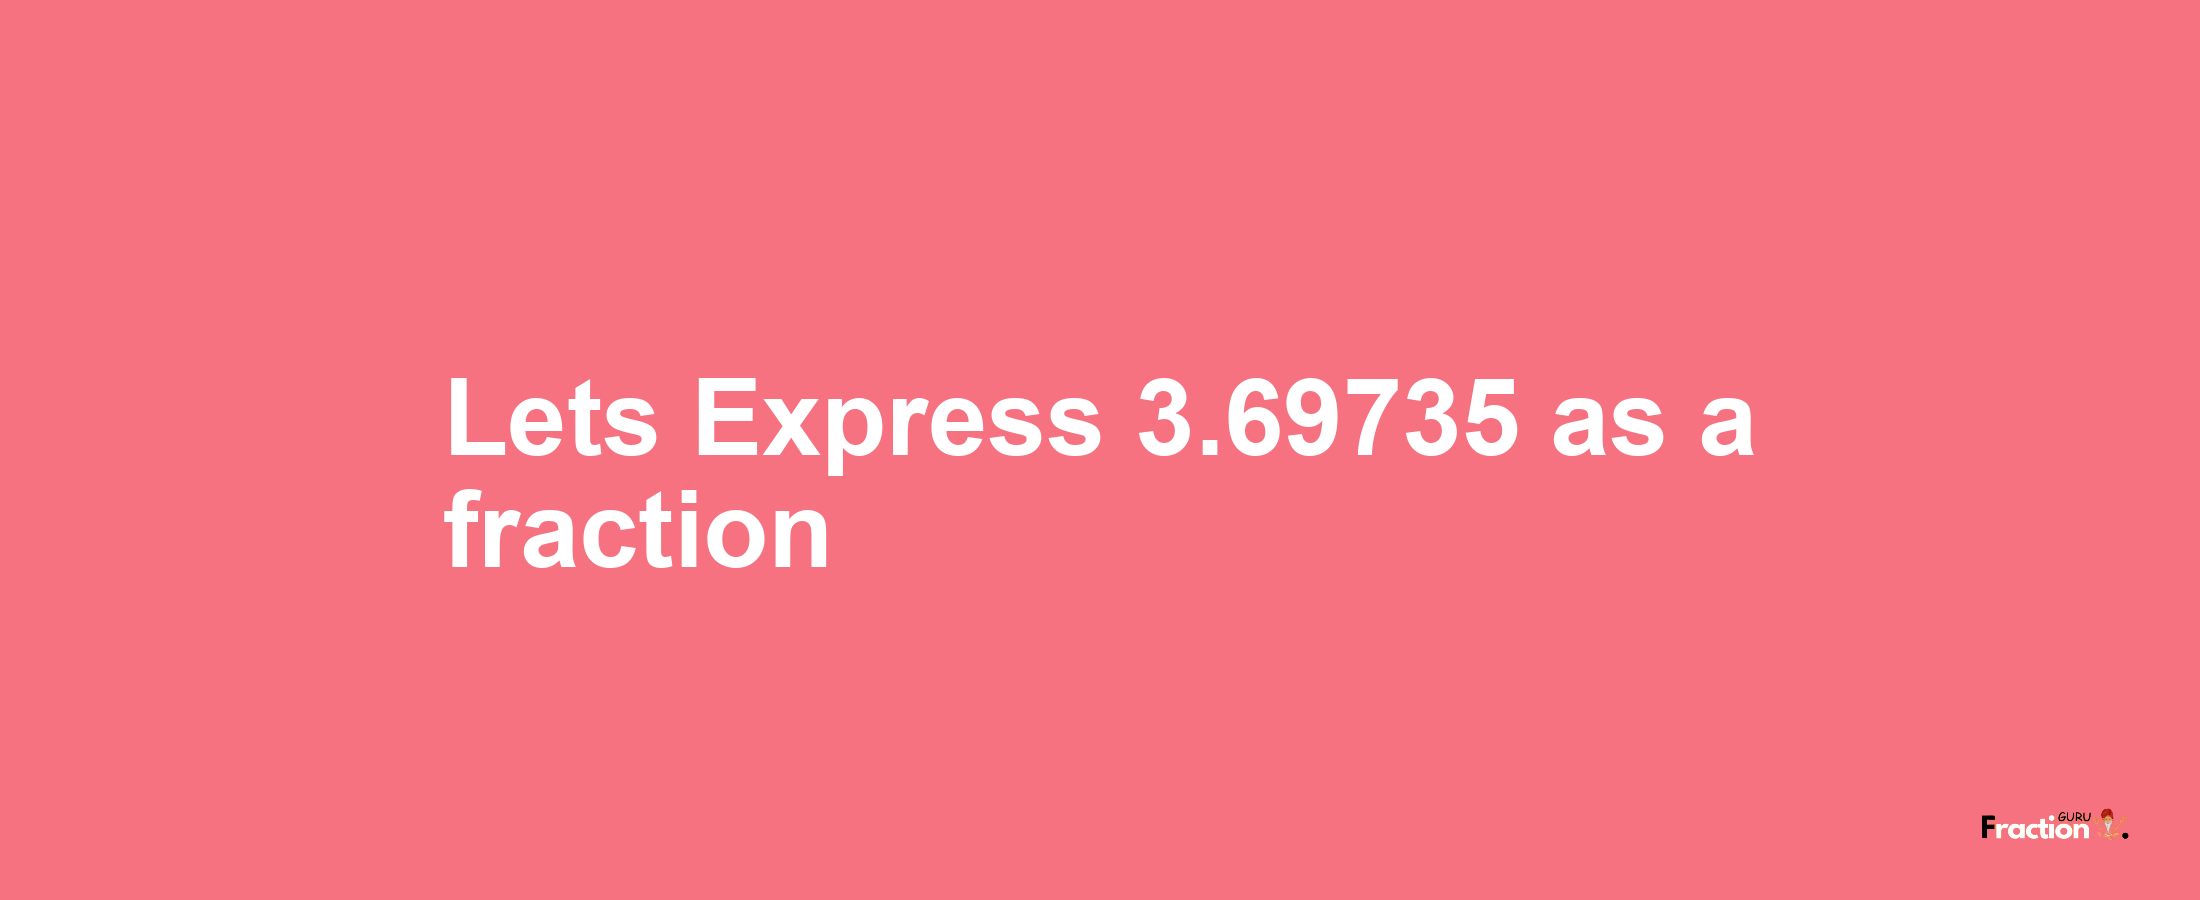 Lets Express 3.69735 as afraction